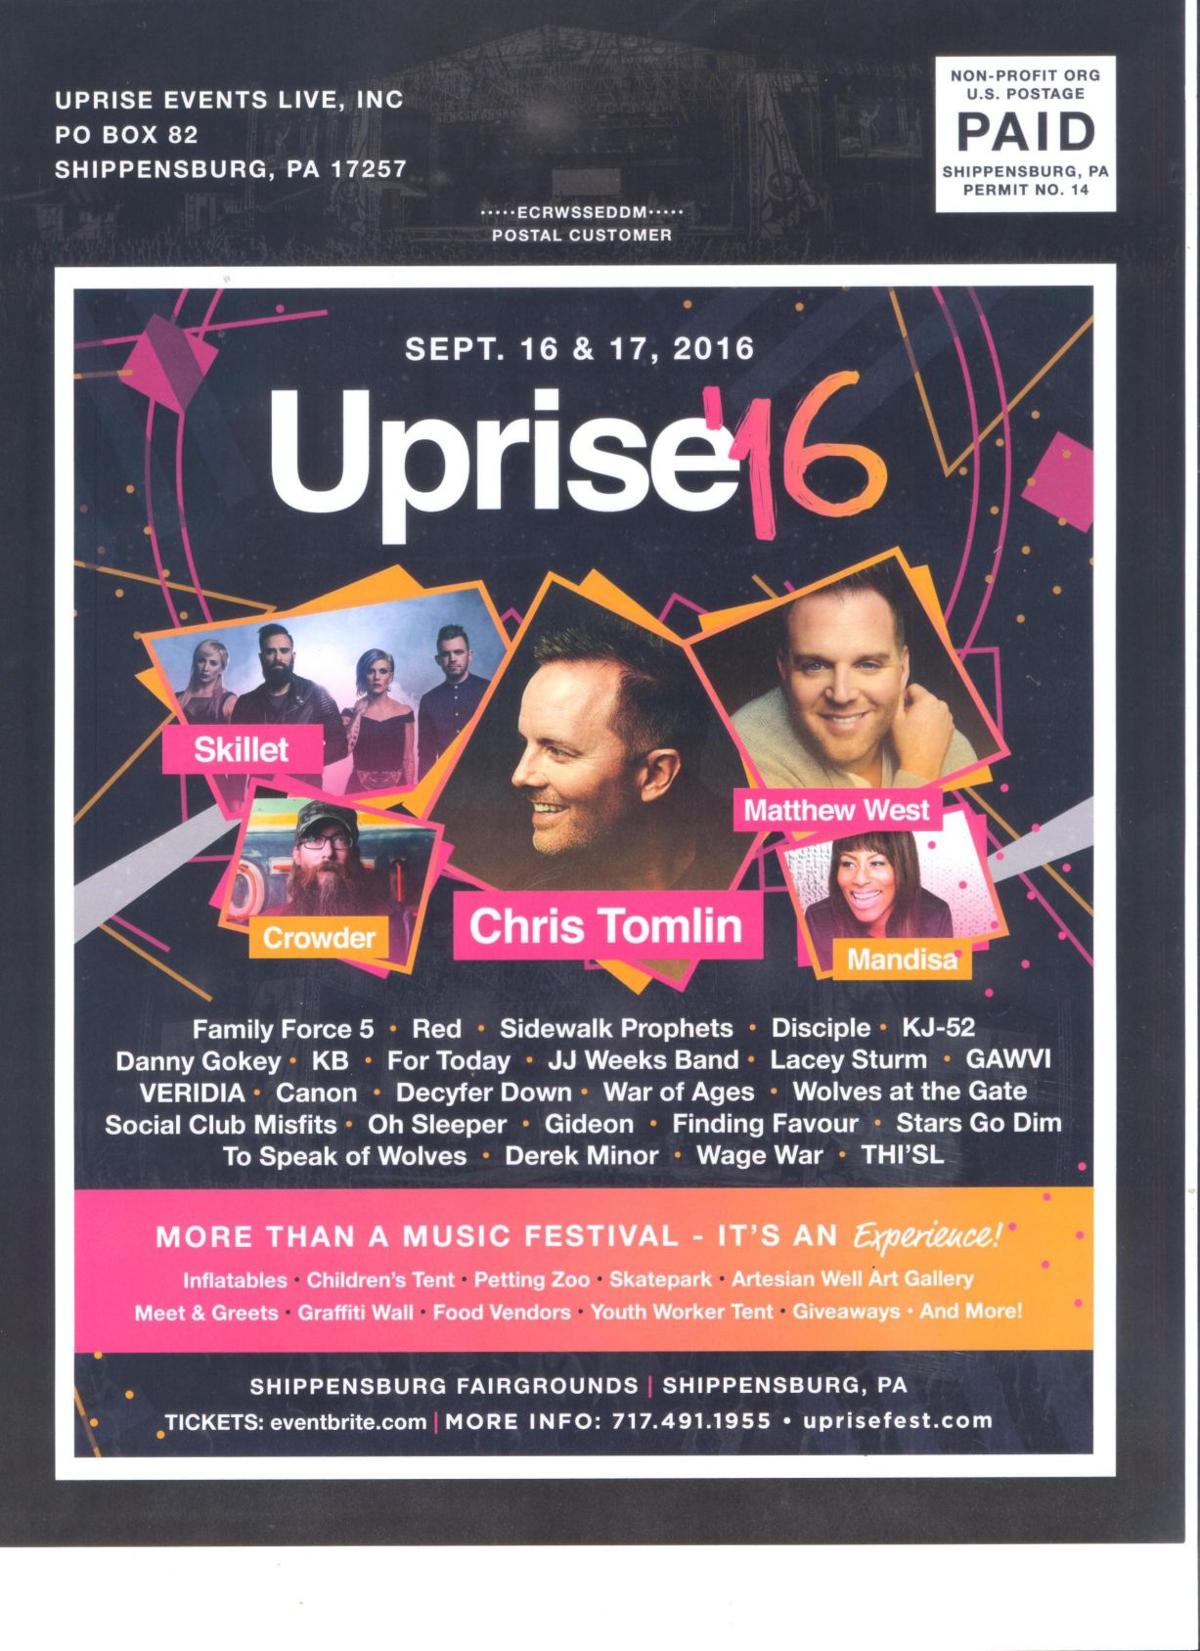 Uprise Fest to lift the spirits of thousands Local News